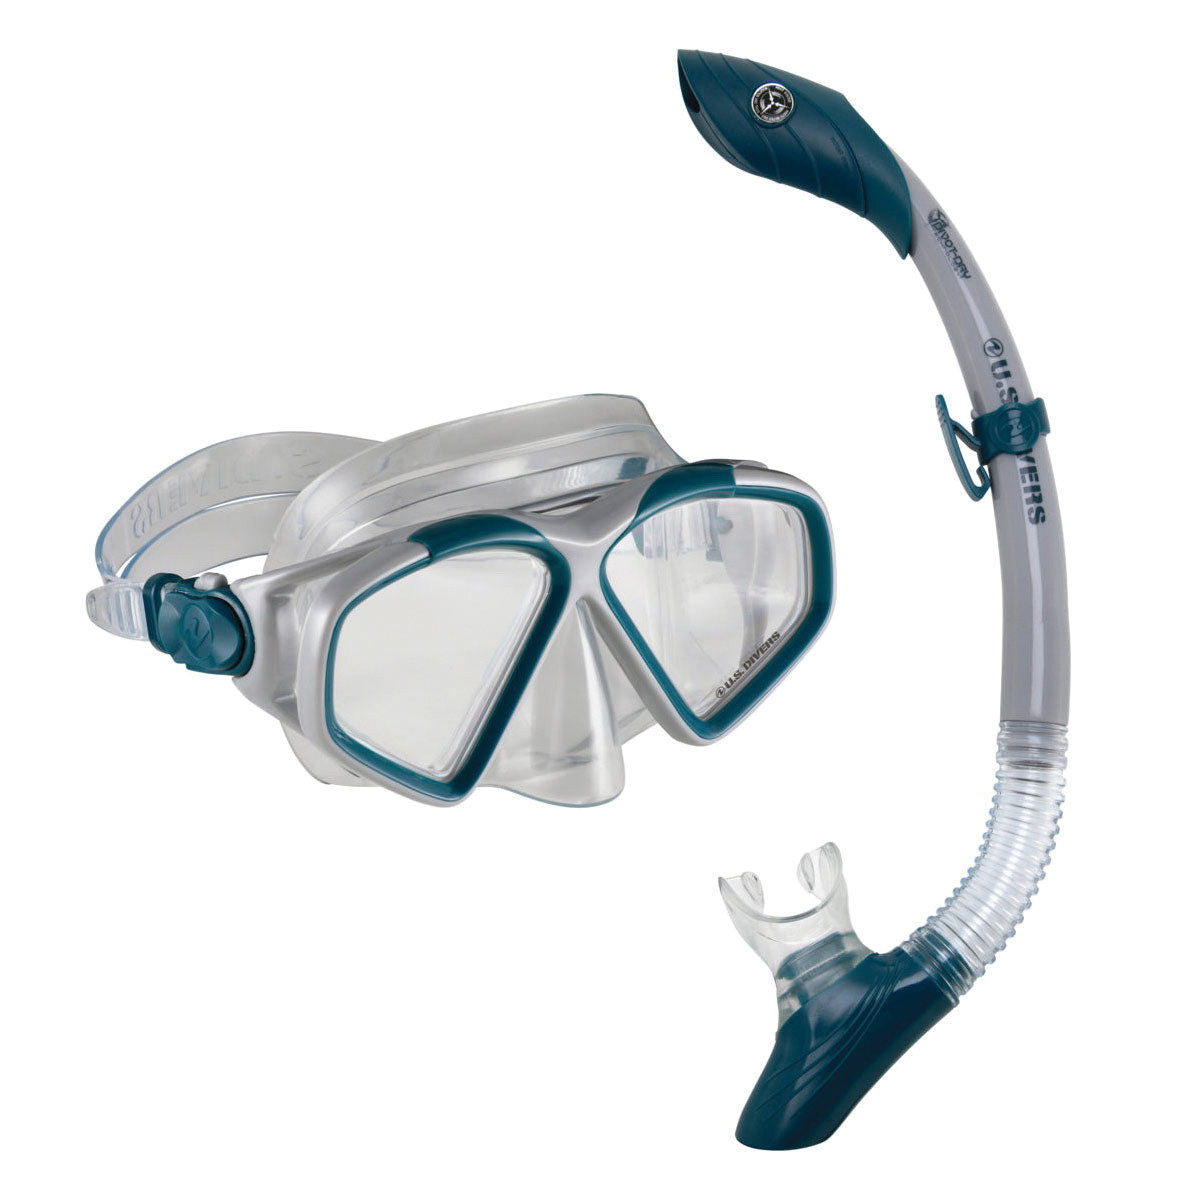 U.S.Divers Cozumel TX Series SC3161004L Mask and Snorkel Combo, Polycarbonate, Gray/Navy - 1